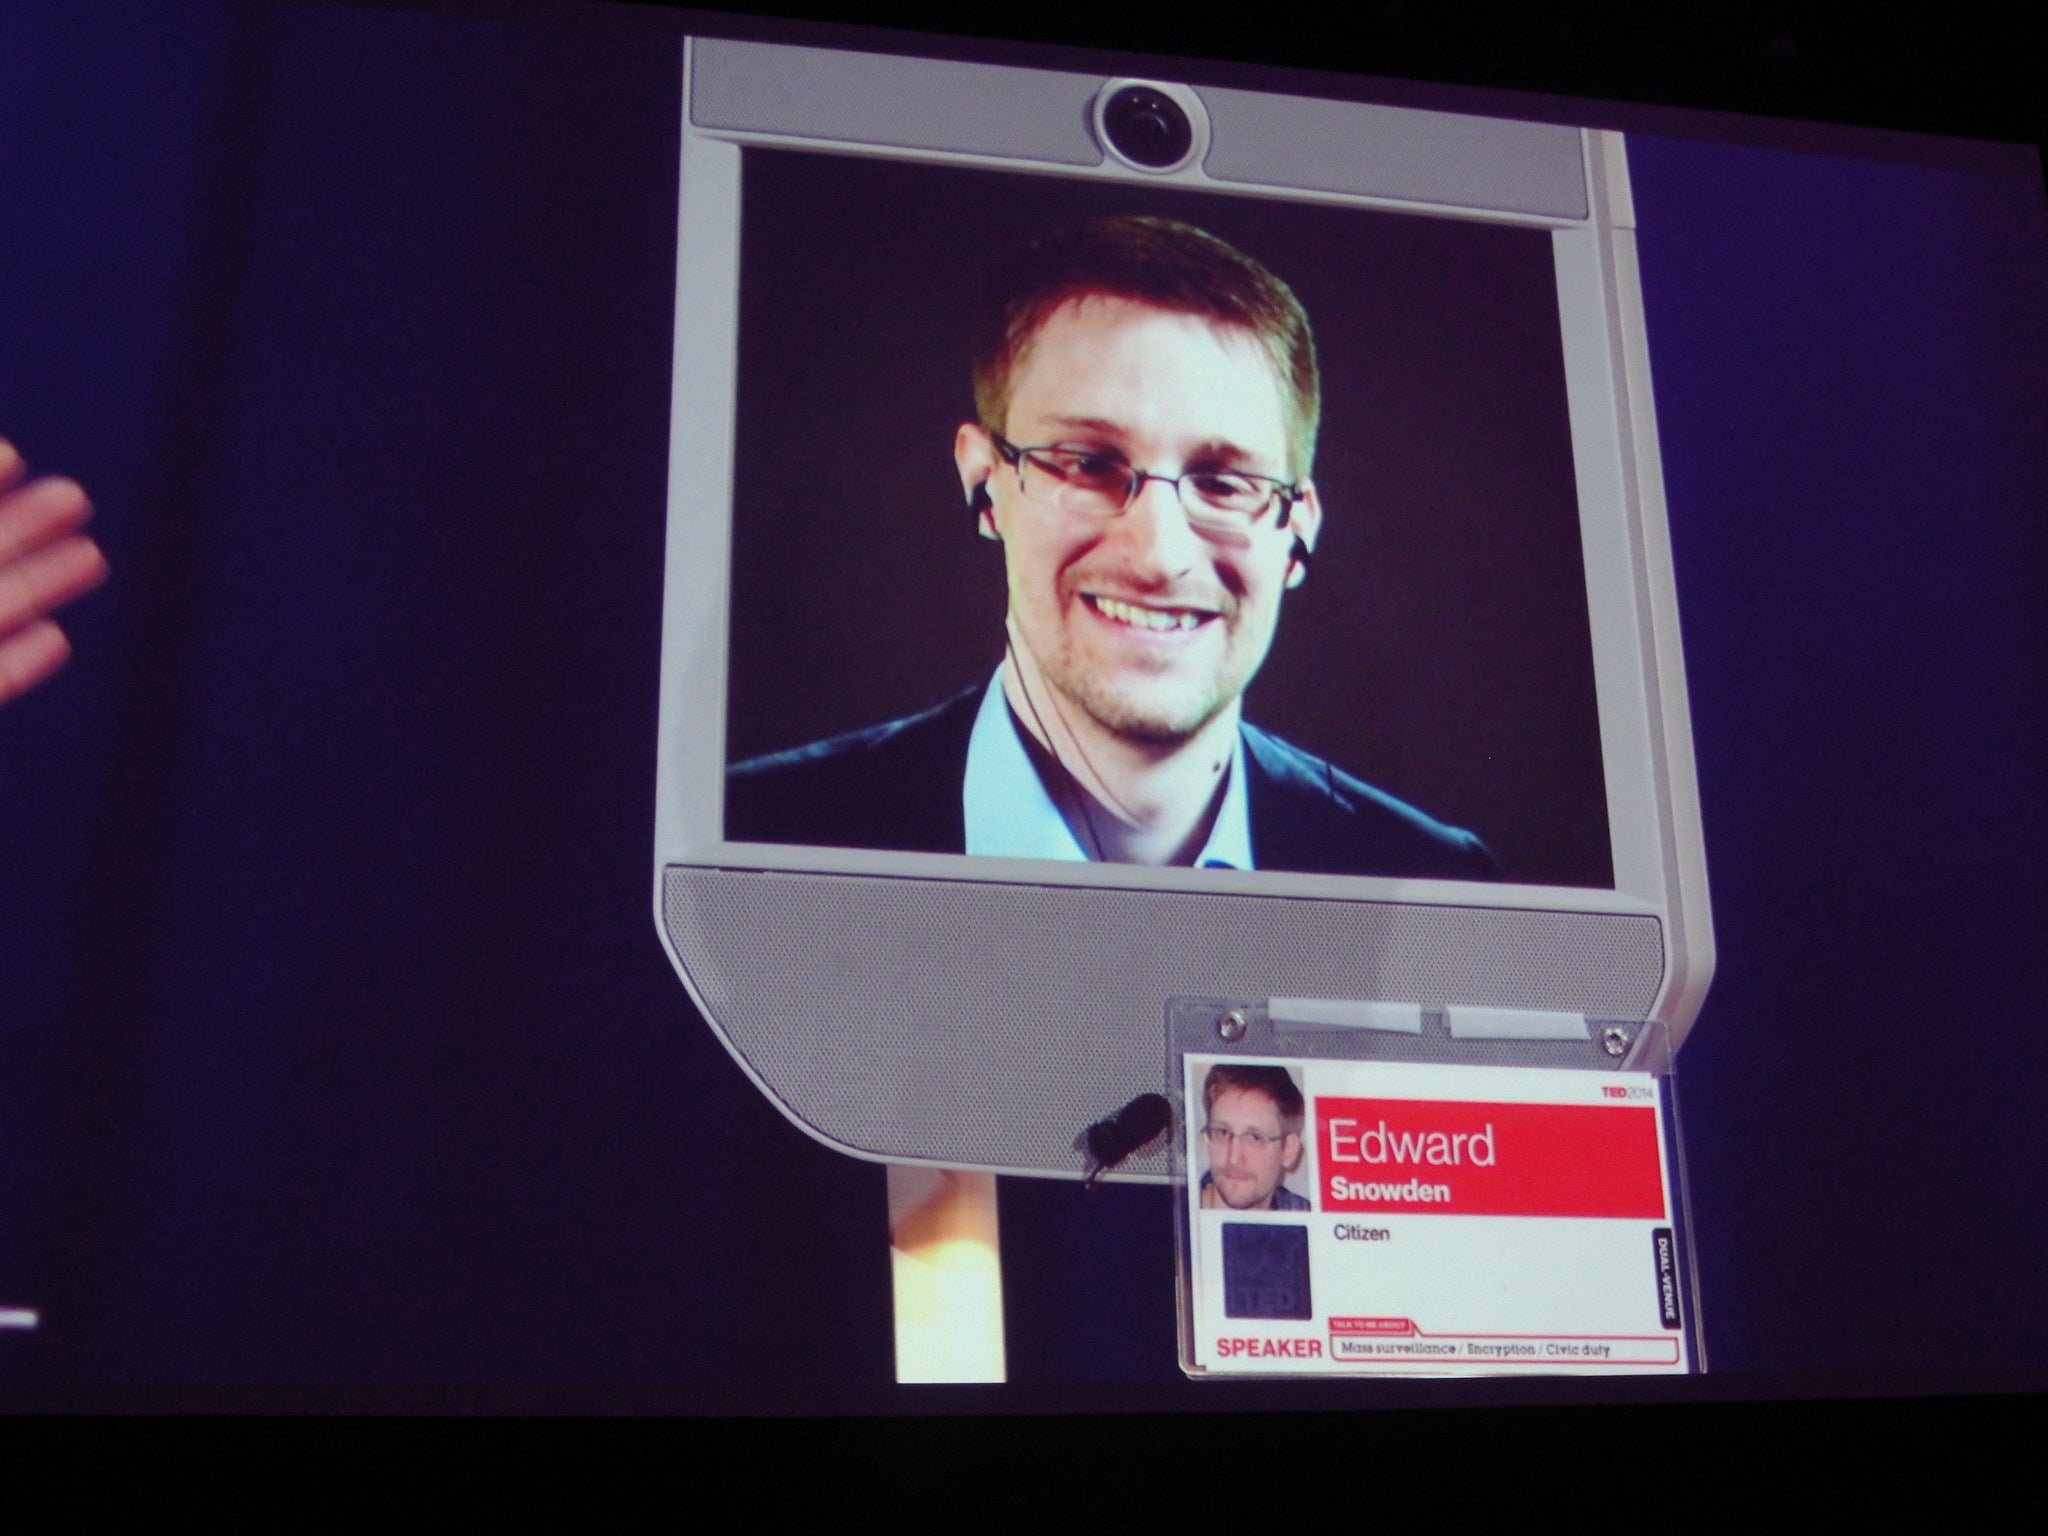 Snowden appears in a telepresence machine, but is given his own badge for attending TED.